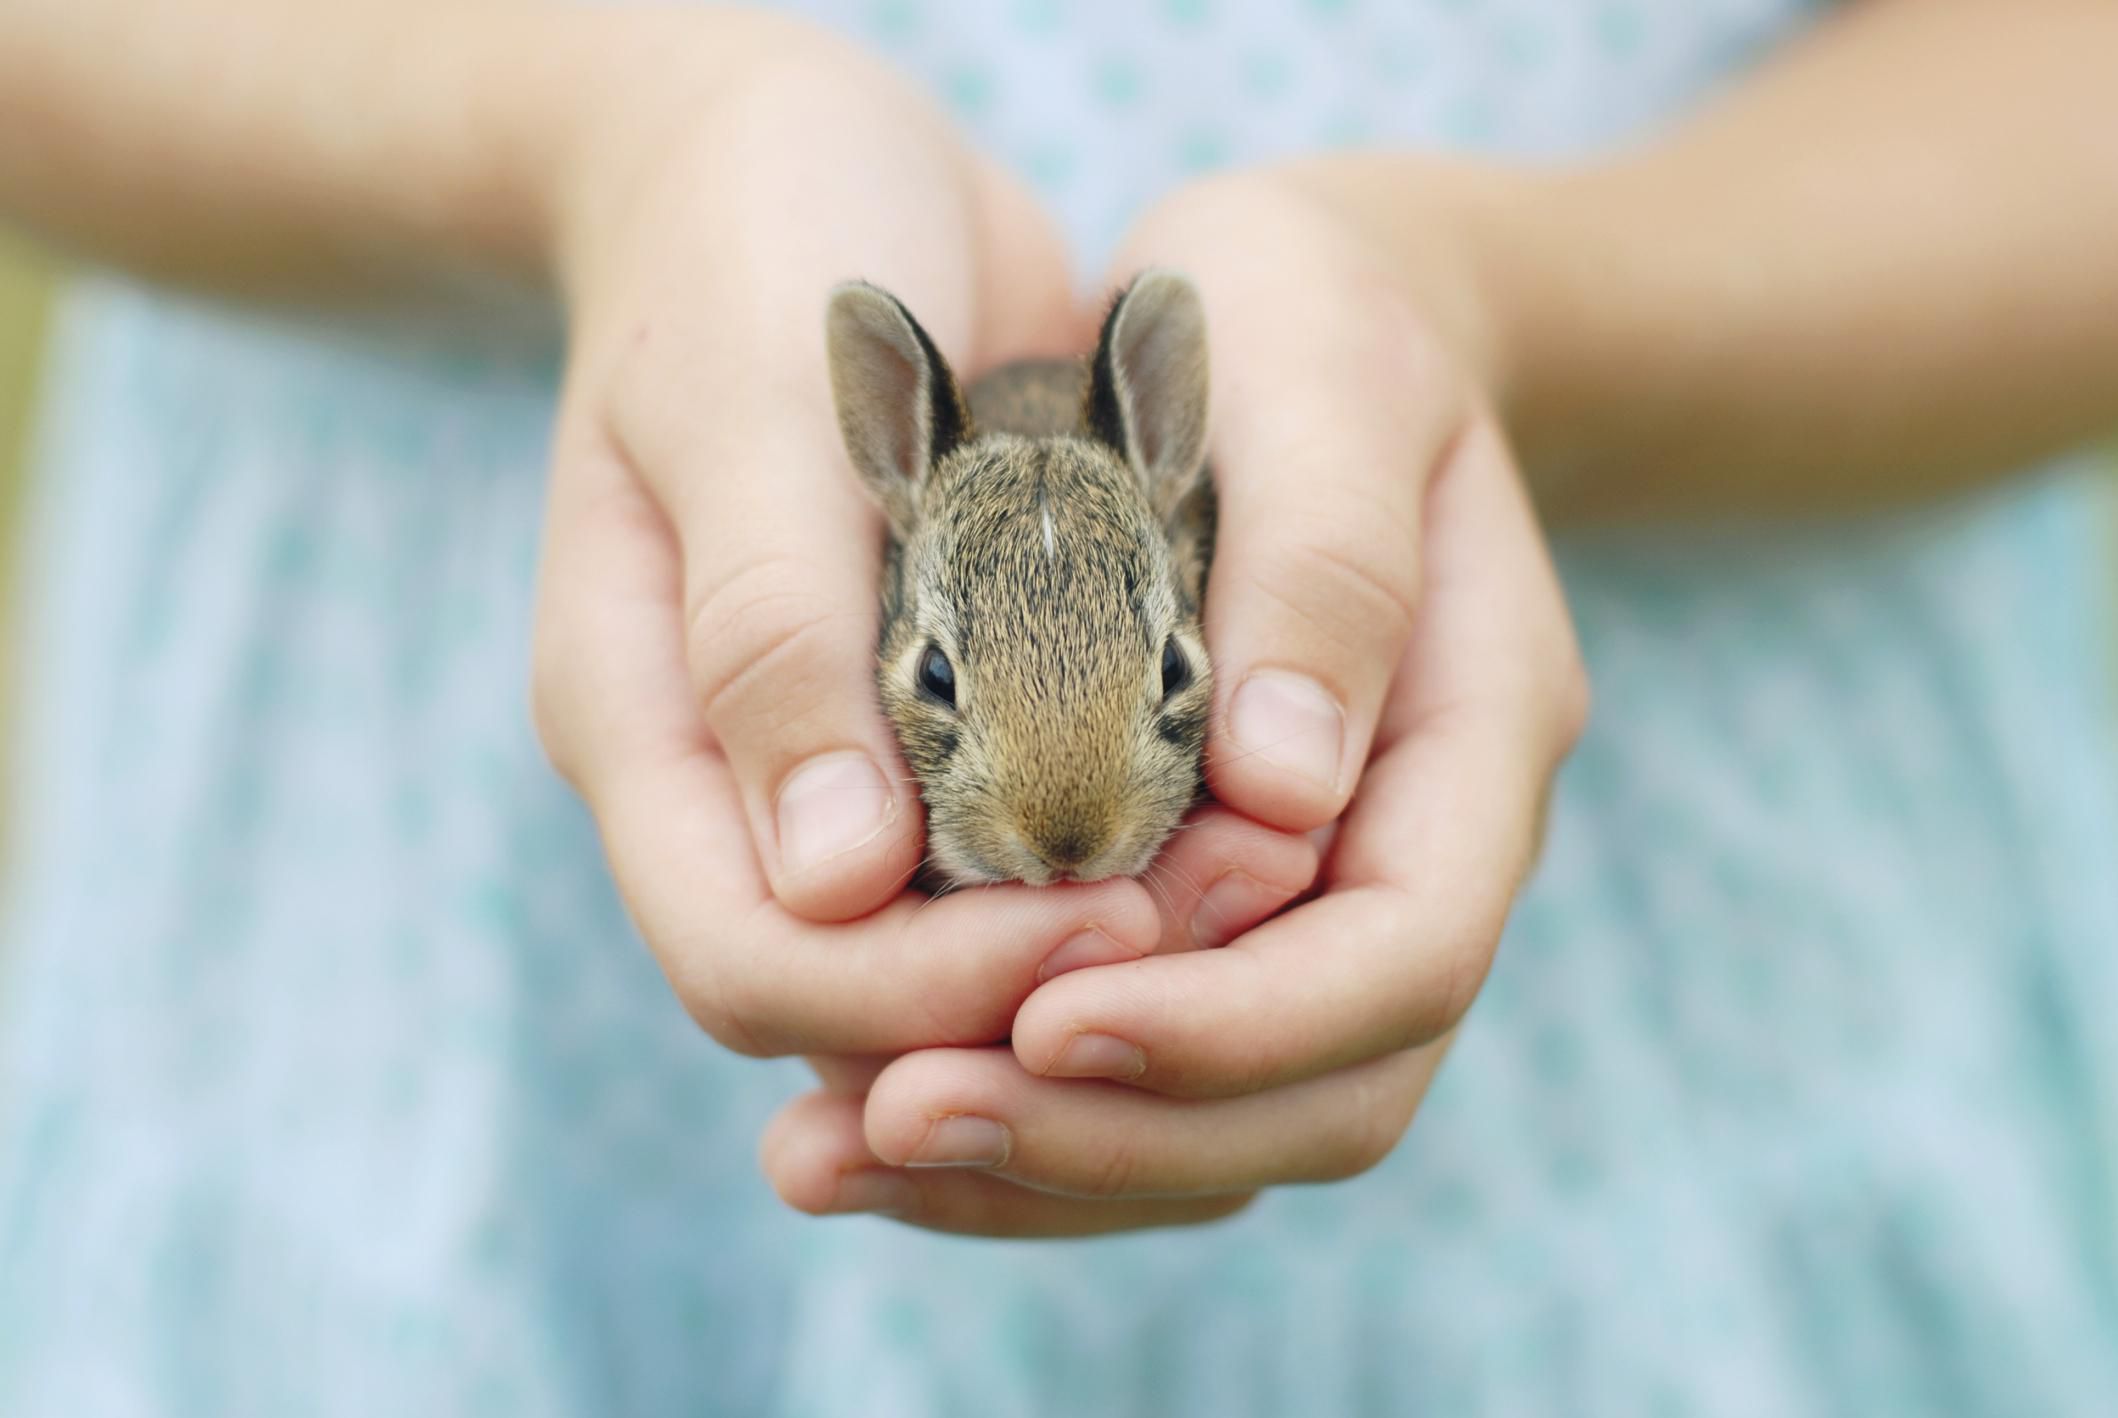 A girl's hands holding a baby bunny